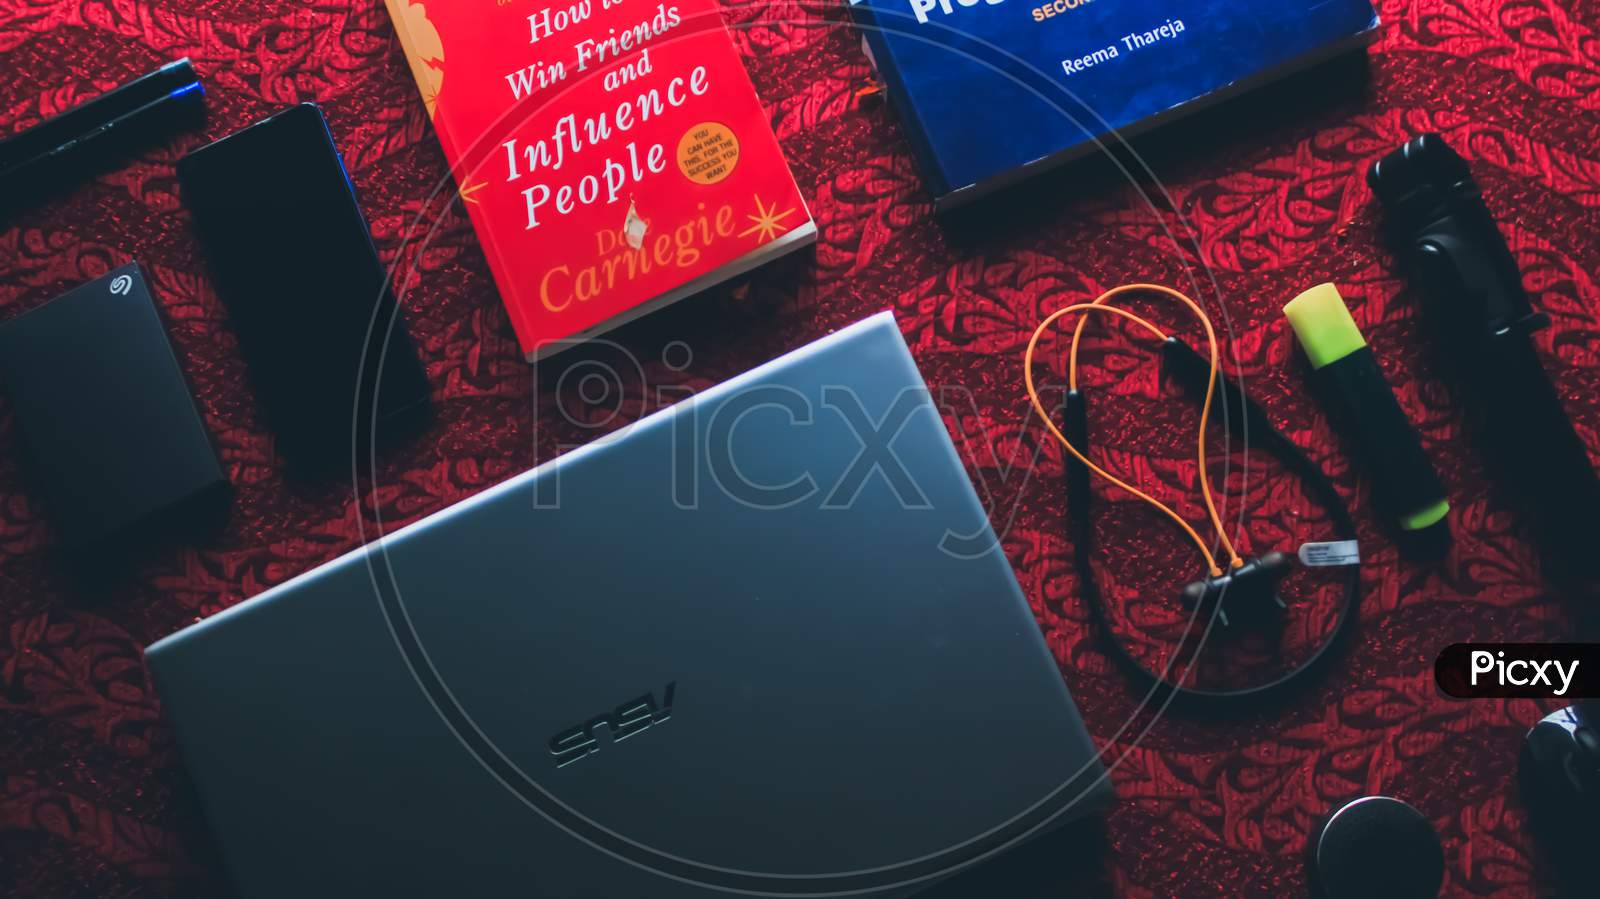 Portable electronics and books on the cleared red table.